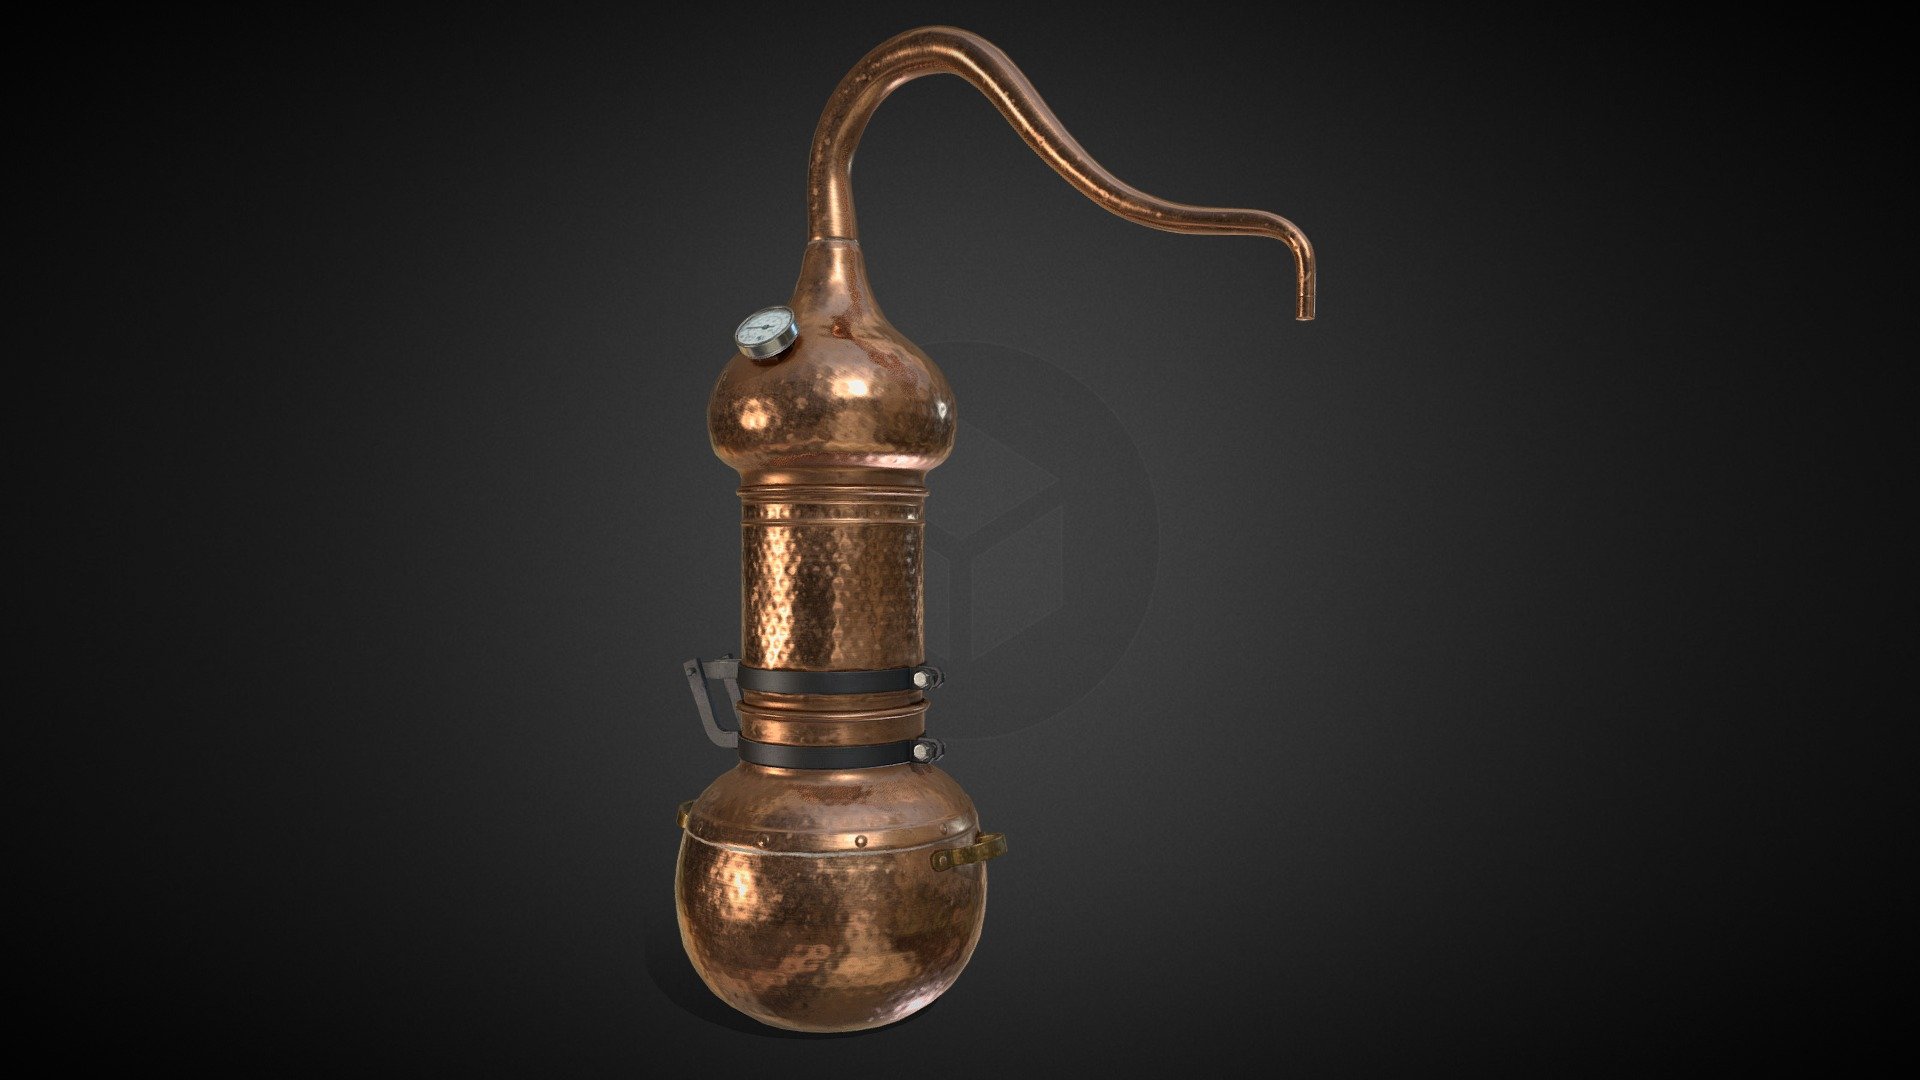 Alembic still columns are used for distilation of liquids. You can create essential oils and distiled plant water from plans, flowers and herbs.

This is modelled after alembic still column that my wife was kind enough to let me use as reference. Modelled, sculpted and UV'd in Blender, baked and textured in Substance Painter.

2048x2048 texture set - Alembic Still Column - game ready asset - 3D model by printaboy 3d model